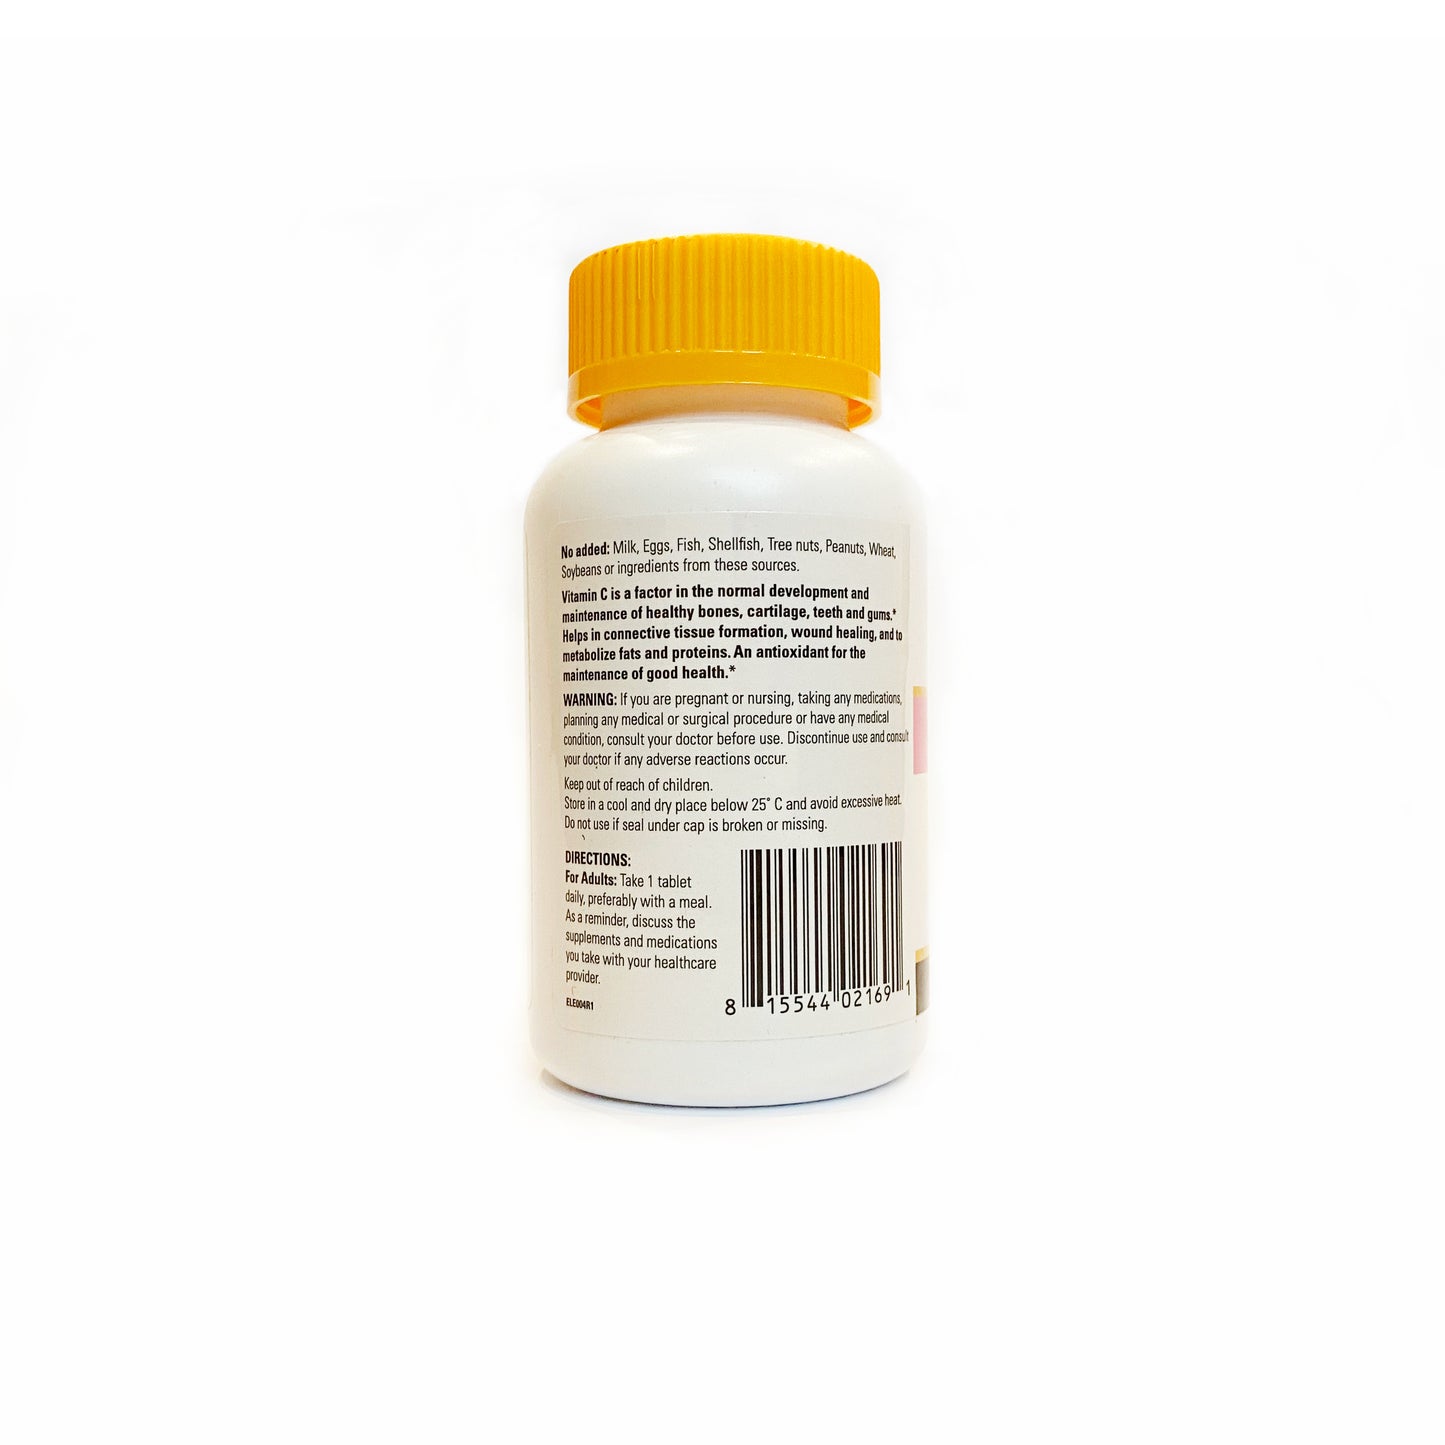 Vitamin C Timed Release 1000mg Tablets